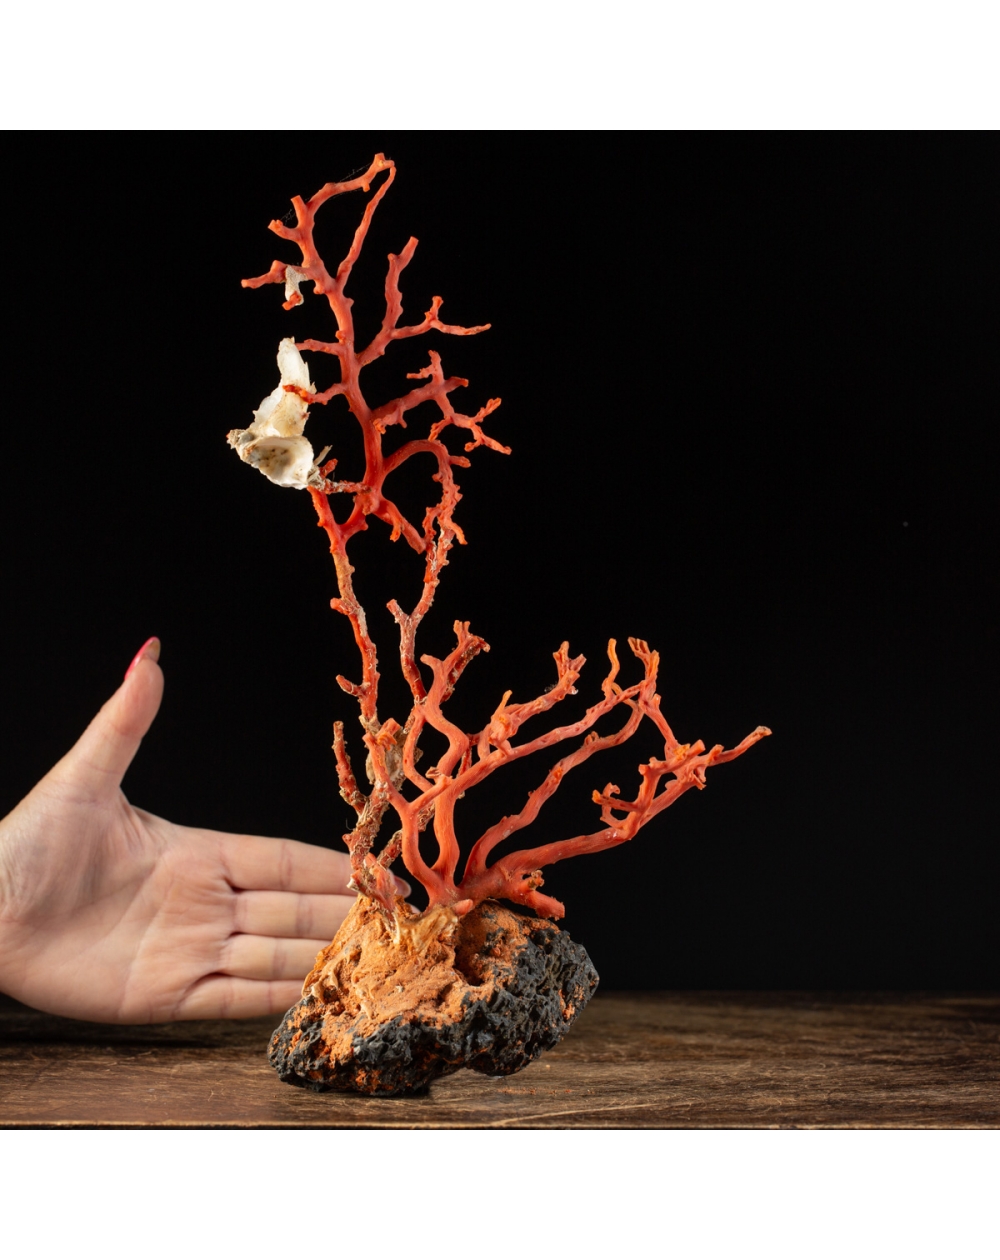 Coral on stone base